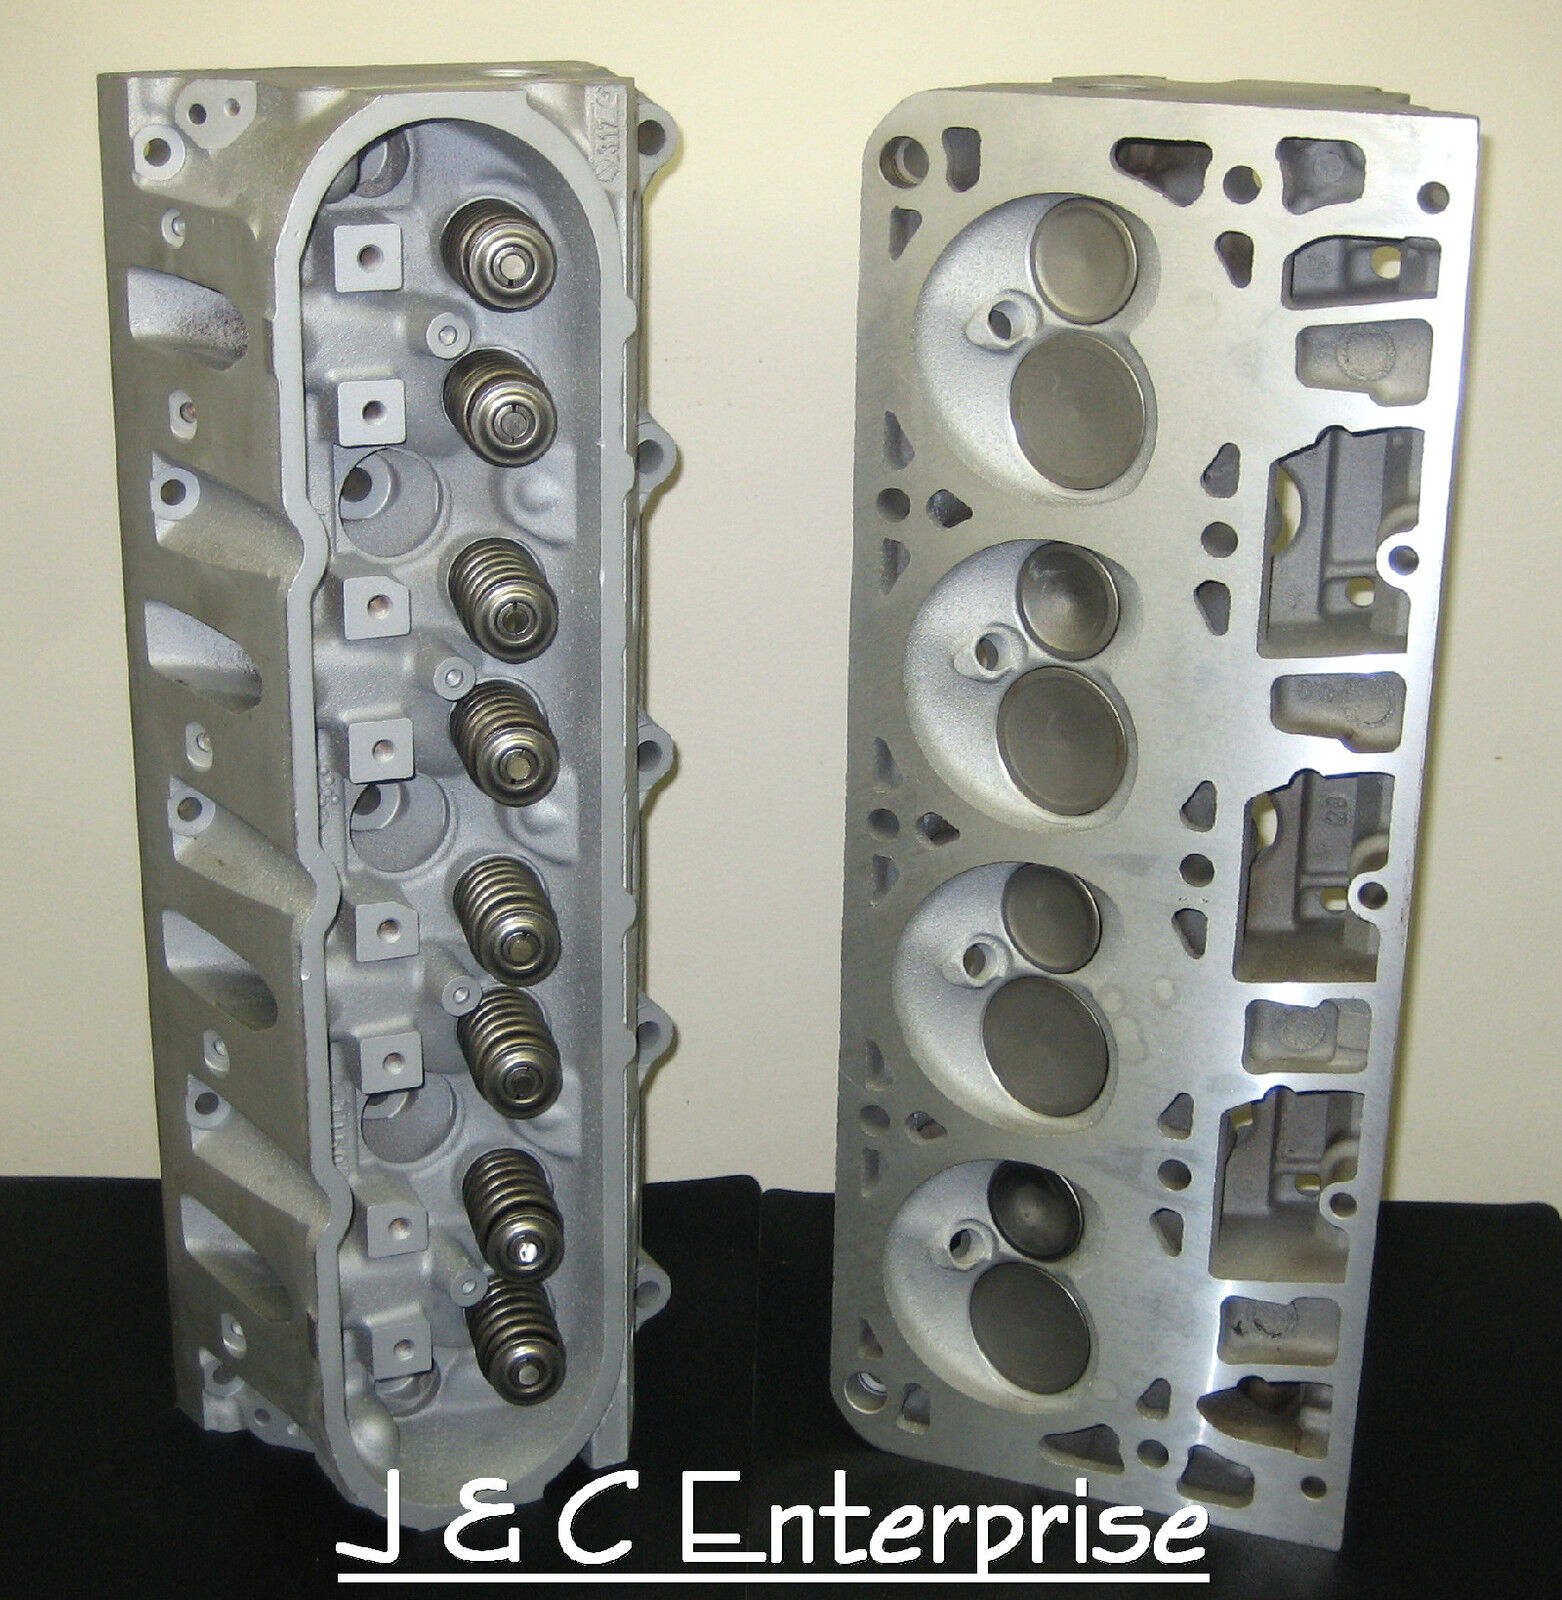 REBUILT PAIR 5.3 GM GMC CHEVY CYLINDER HEADS 243 CASTING NUMBER LS2 LS6